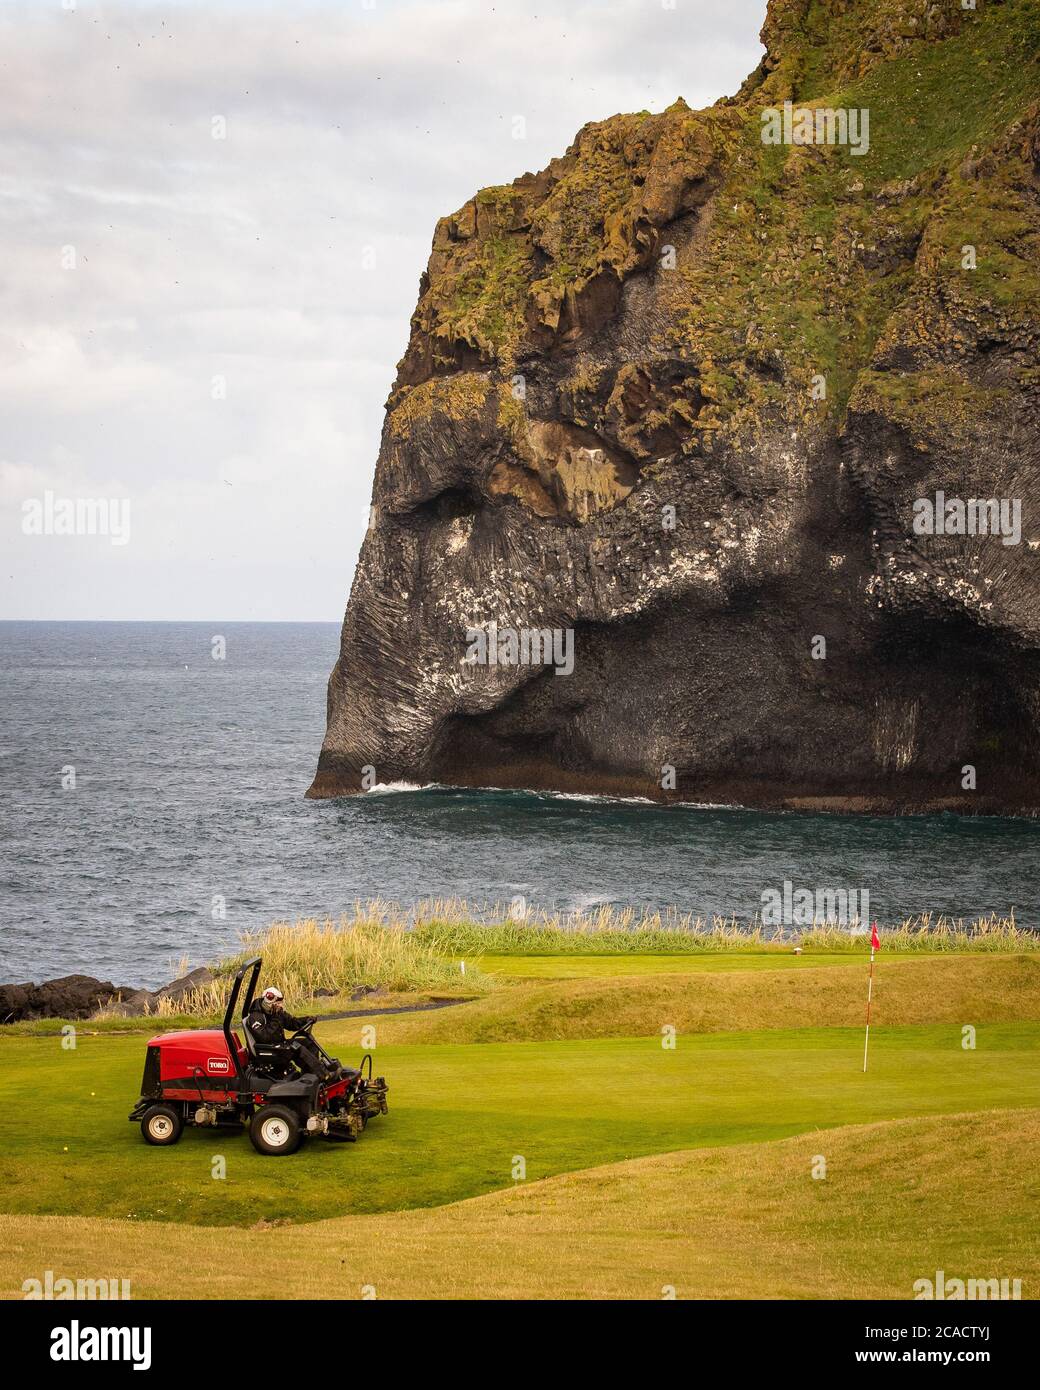 A grounds keeper tends to the Westman Island Golf Course on the island of  Vestmannaeyjar, in front of the Elephant Rock, a natural rock formation on  the Westman Islands archipelago, located approximately